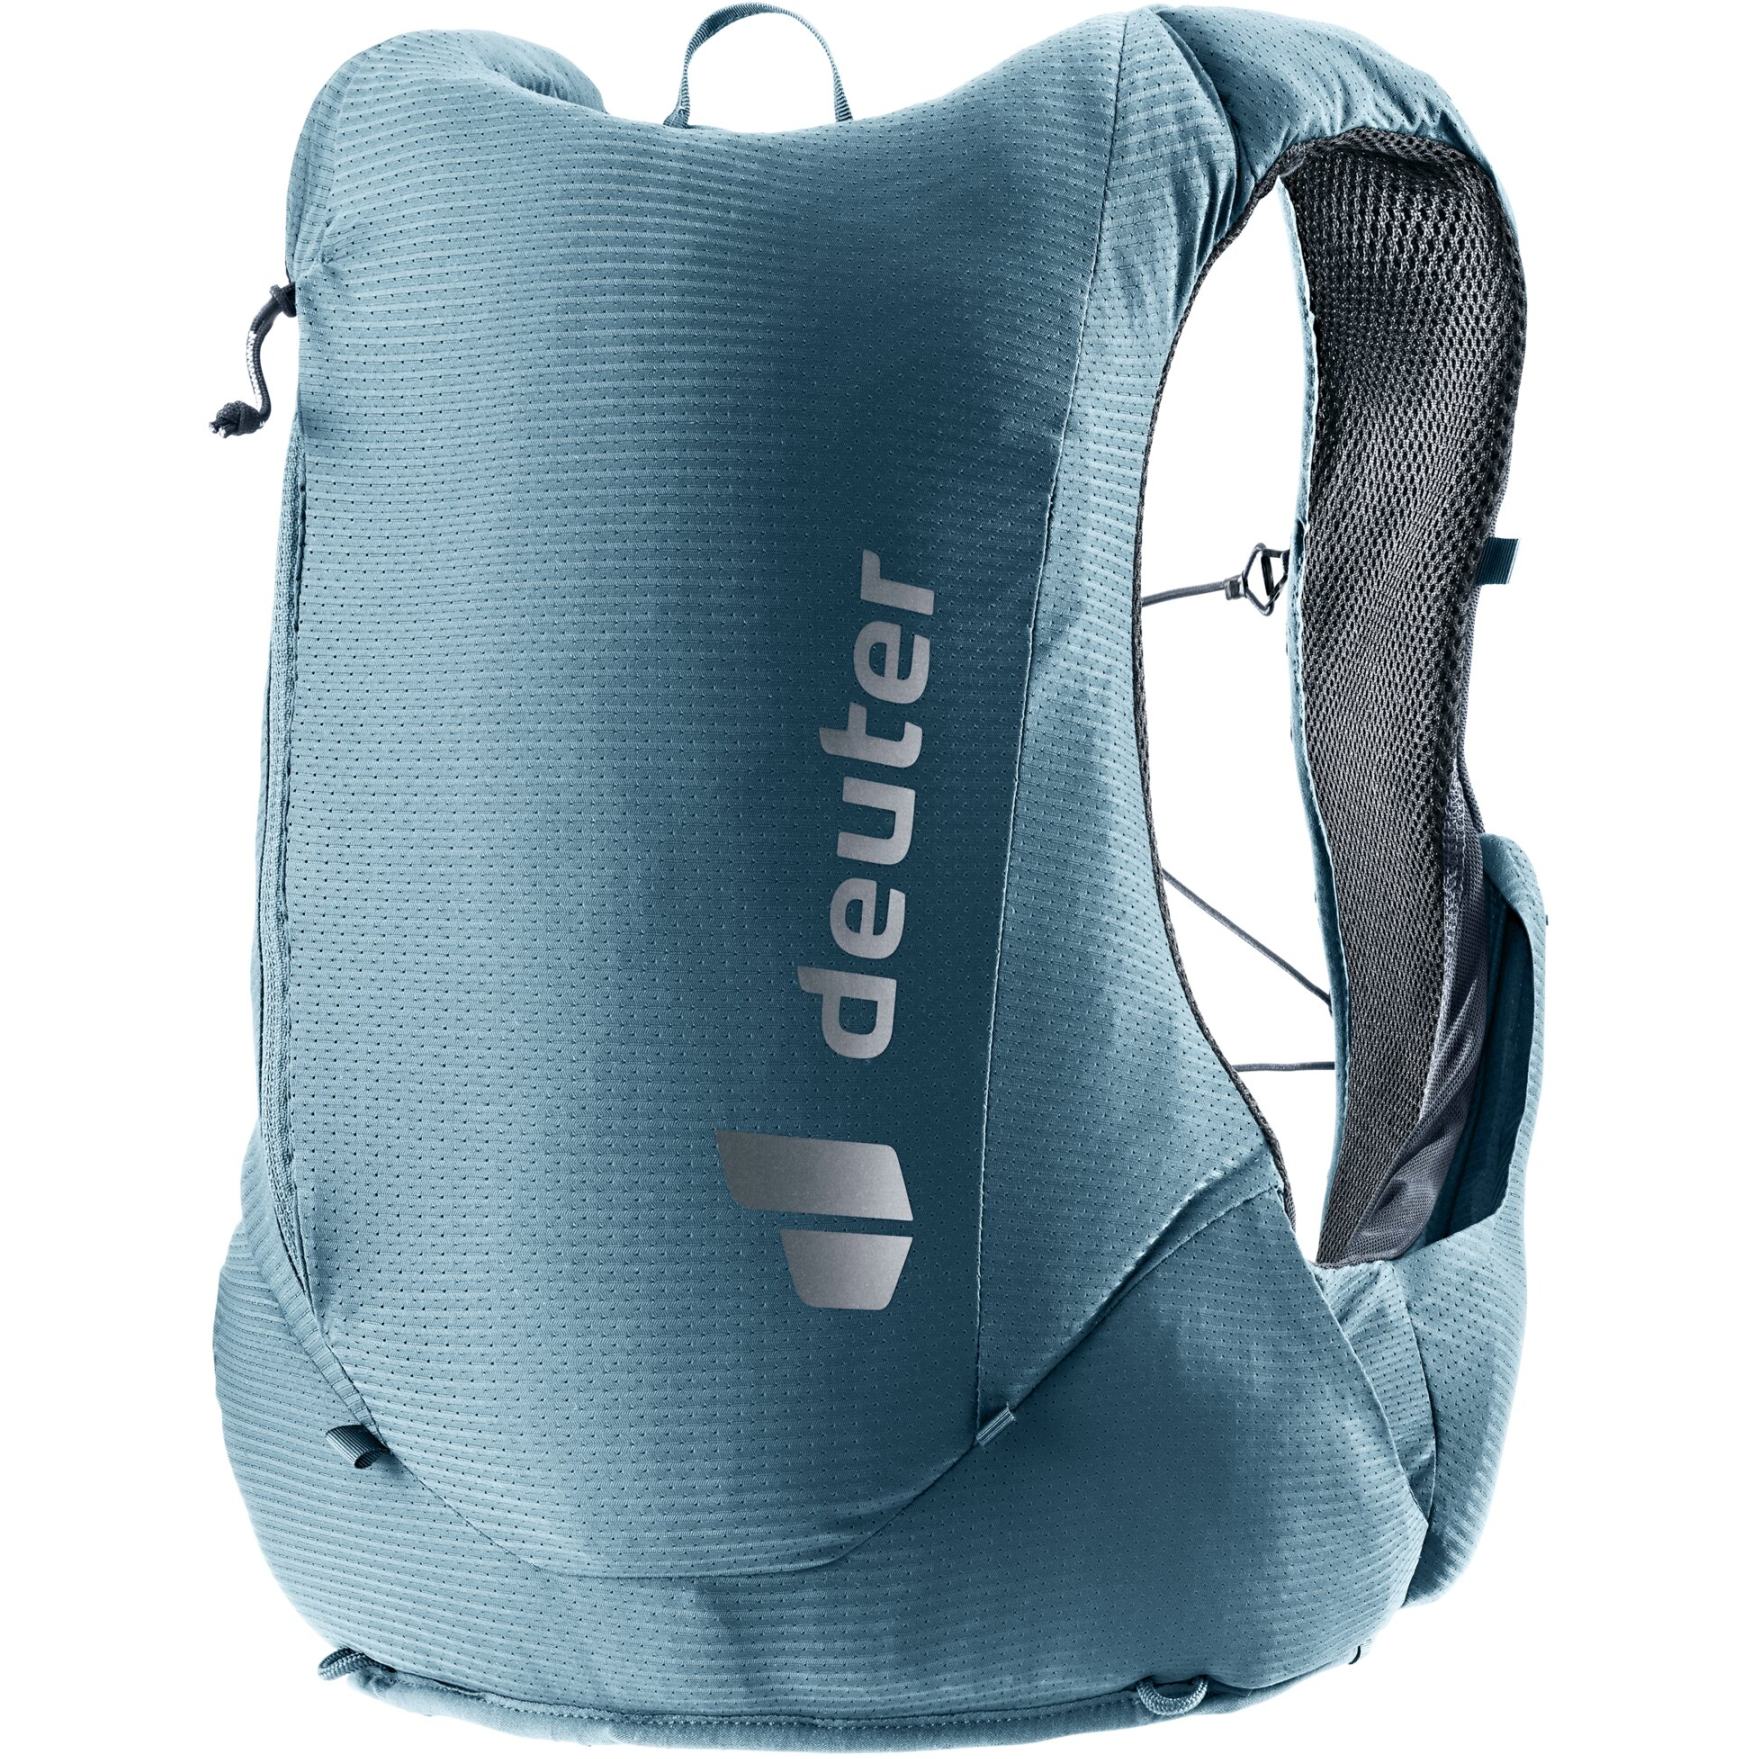 Picture of Deuter Traick 9 Trailrunning Backpack - Small - atlantic-ink